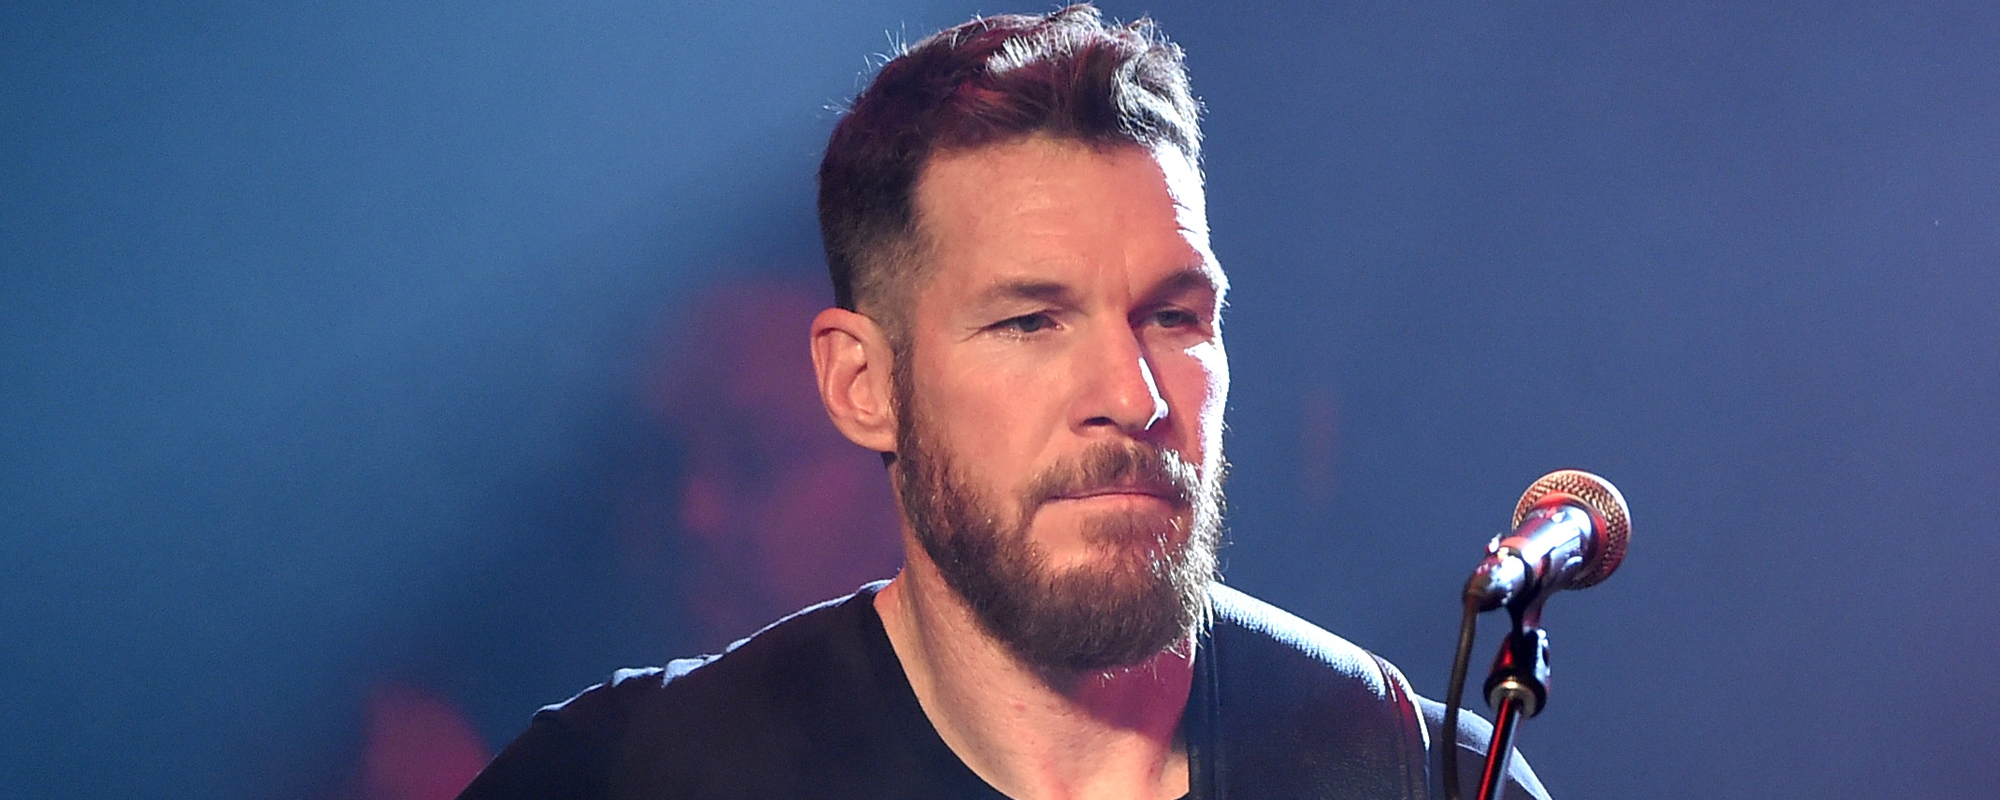 Tim Commerford Left Confused and in the Dark Over Rage Against the Machine’s Future